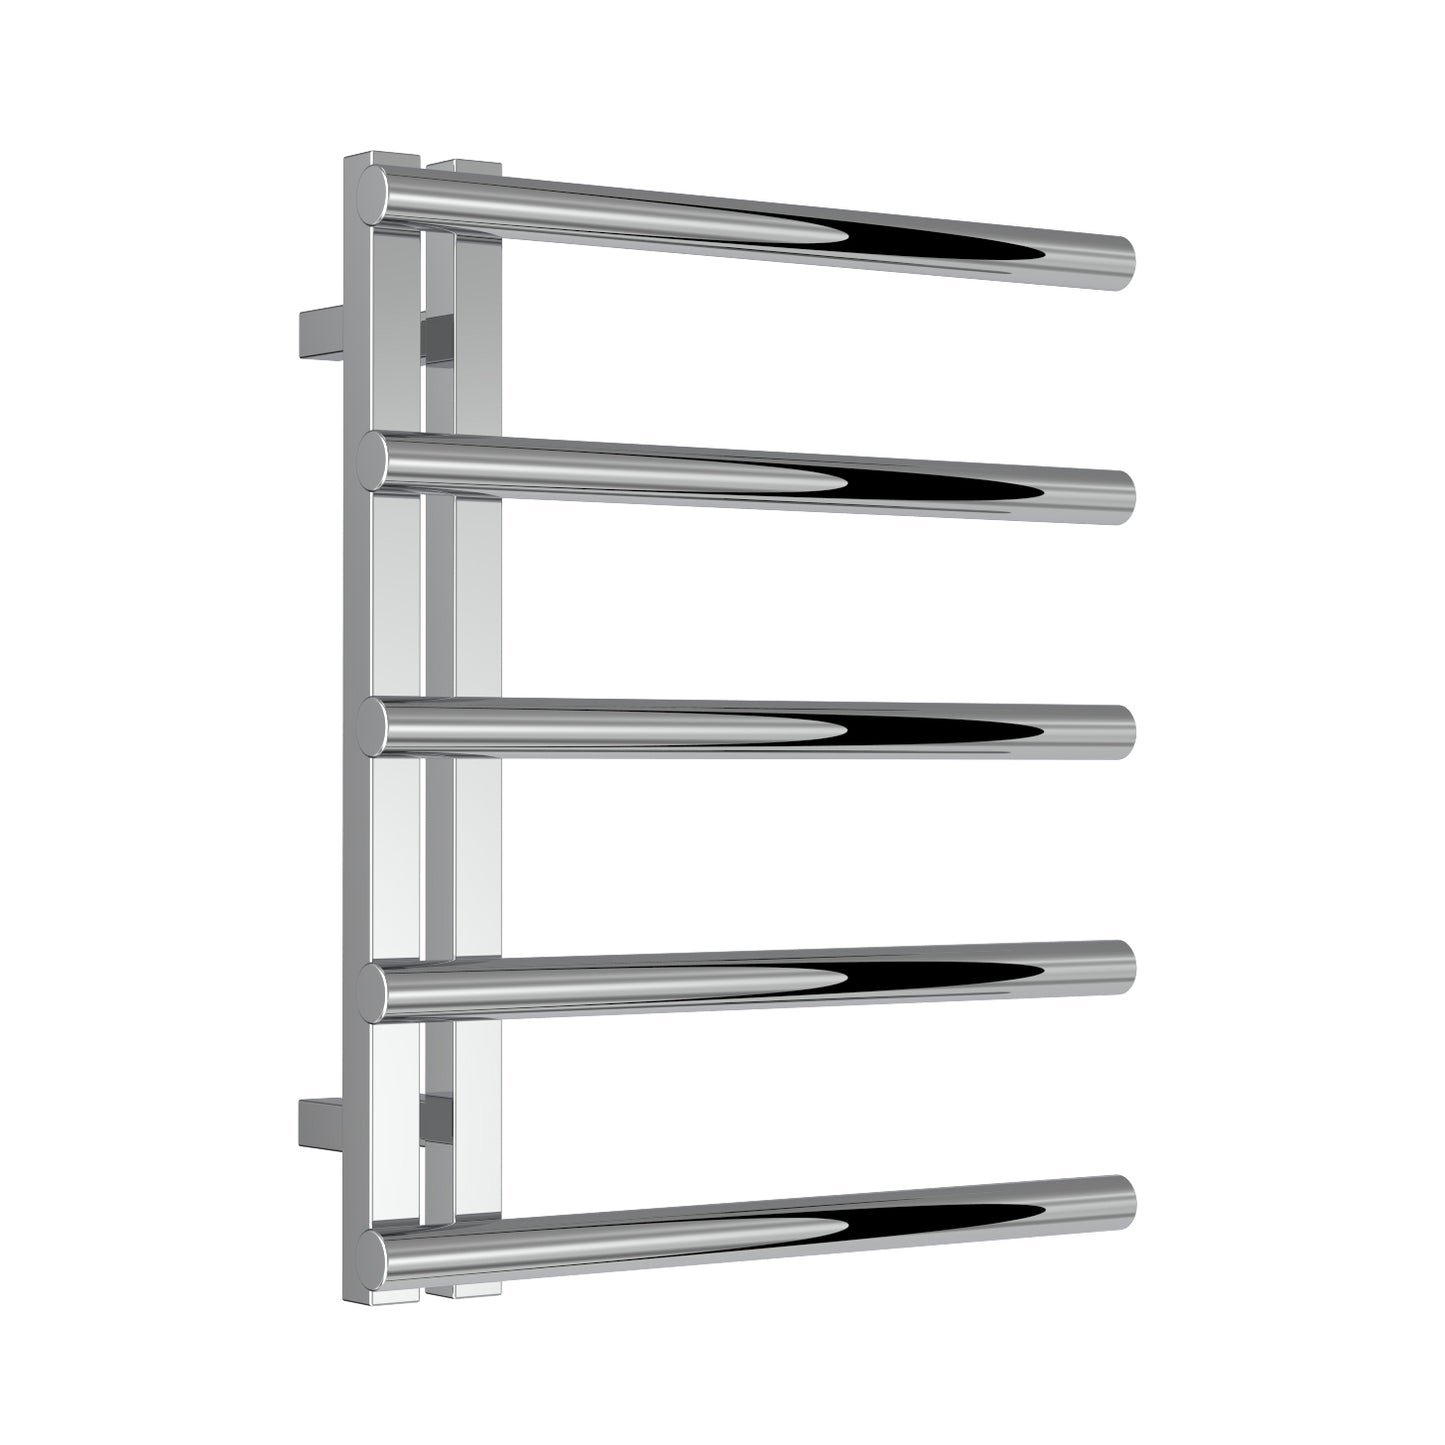 Celico Stainless Steel Heated Towel Rail - Various Sizes - Polished Stainless Steel